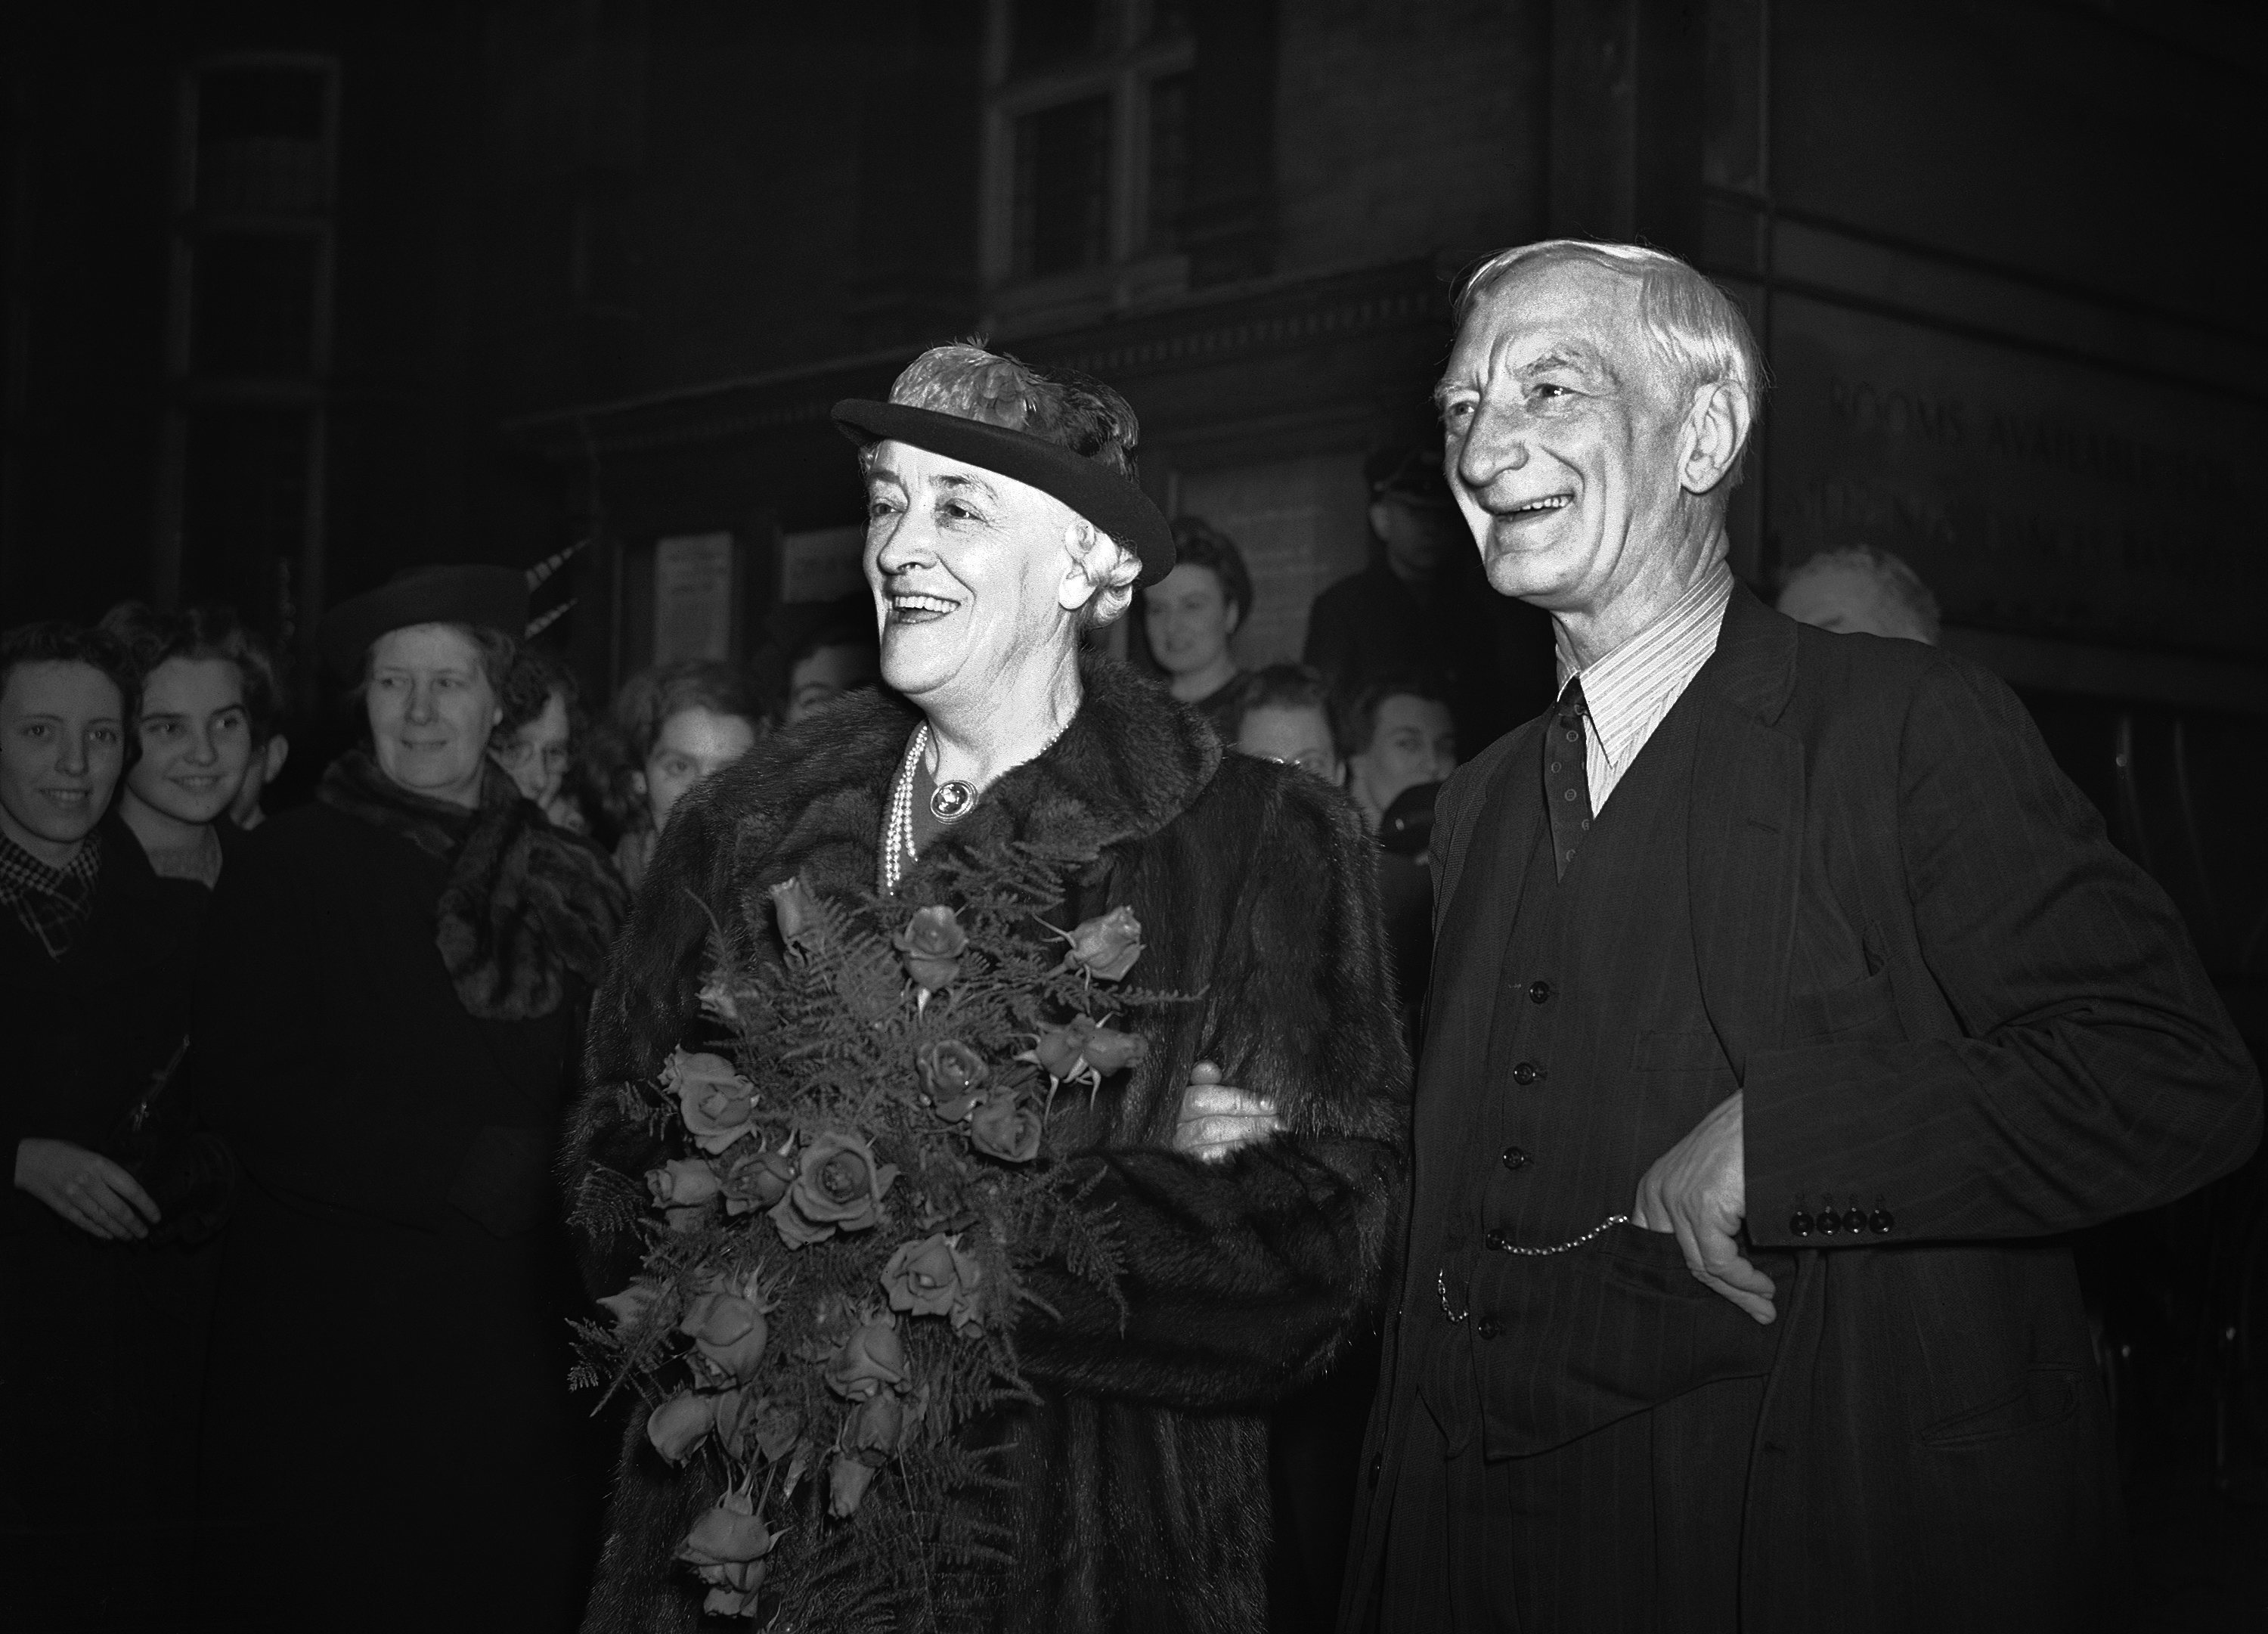 Sir William Beveridge, whose report on social security had brought his name in to the affairs of every home in the land, was married at Caxton Hall on Dec. 15, 1942, to his cousin Janet 'Jessy' Mair. She had been his assistant since 1915 and they married after the death of her first husband David Mair (AP Photo)